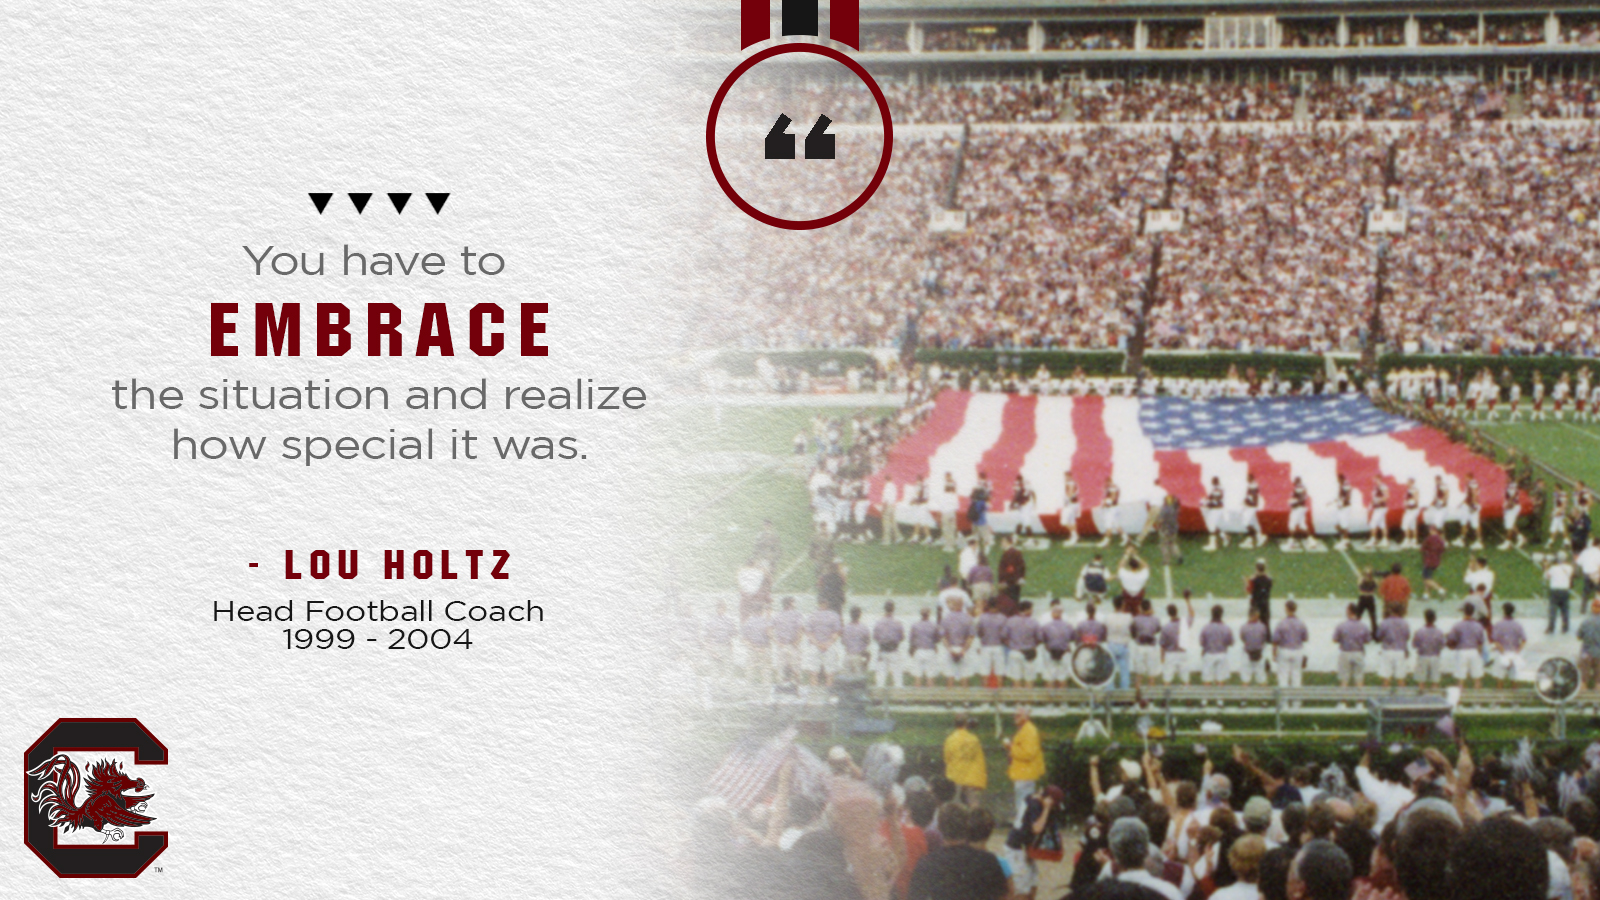 How a South Carolina Football Game Helped Start the Healing After 9/11